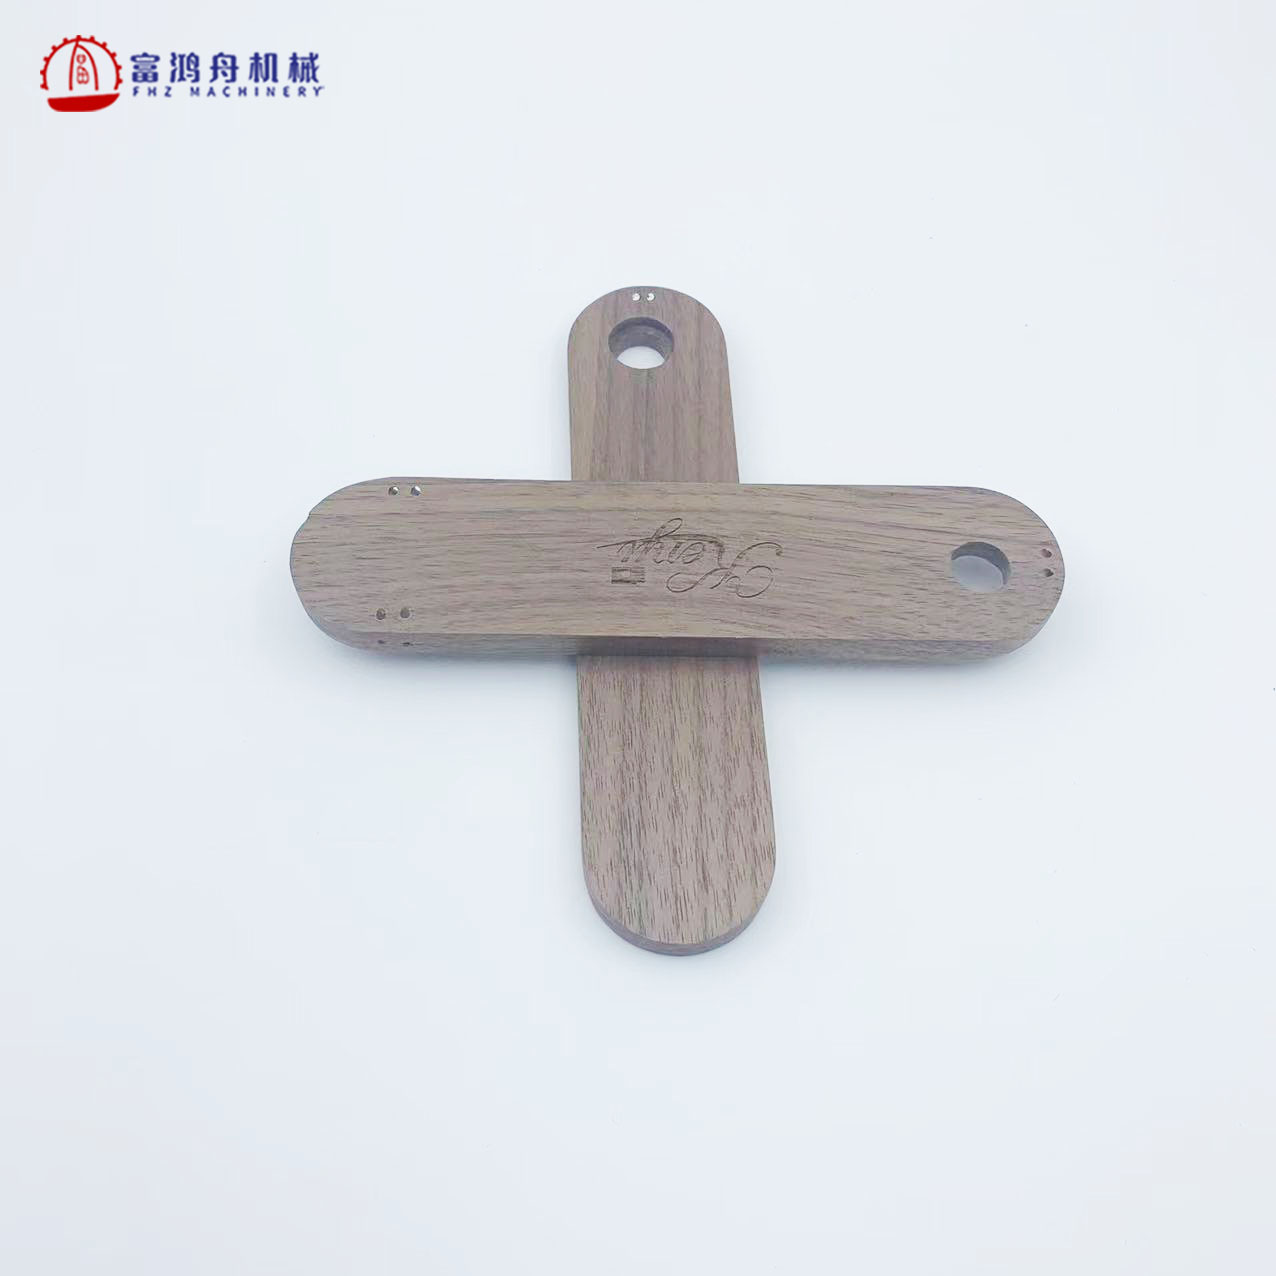 Bck0074 Custom Cnc Wood Processing,Wood Parts,And Wood Products